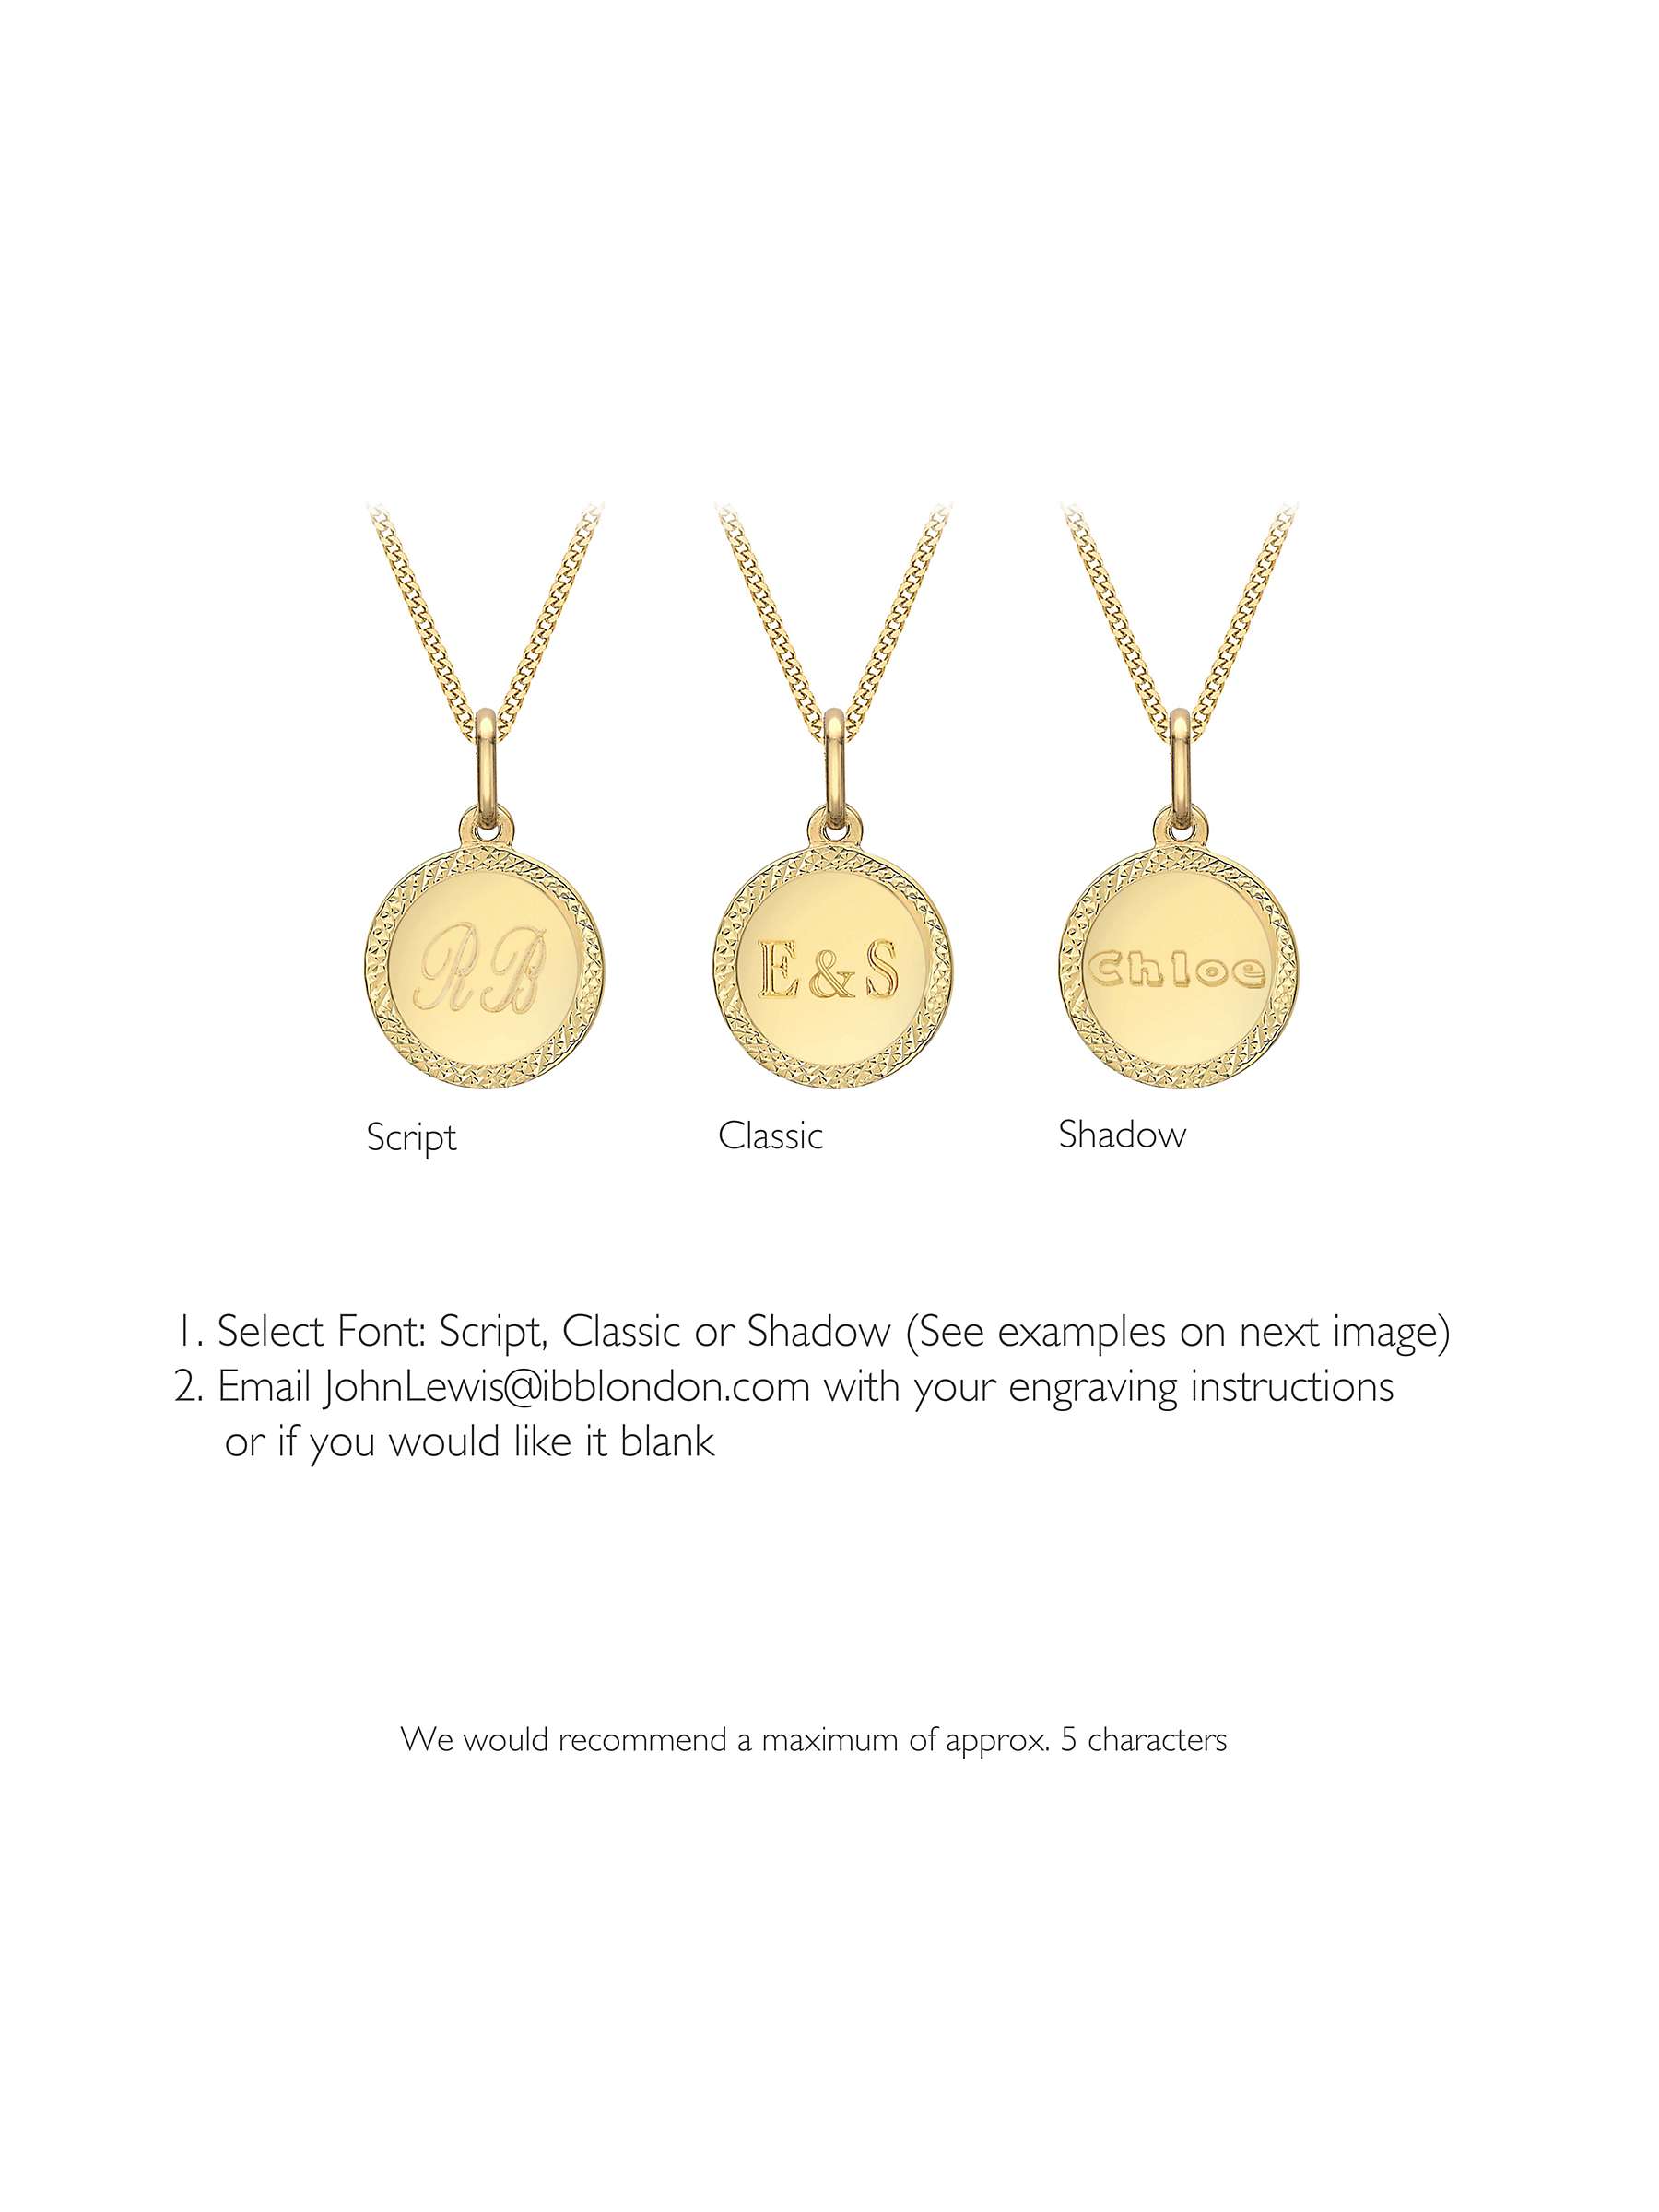 Buy IBB Personalised 9ct Gold Disc Pendant Necklace, Gold Online at johnlewis.com